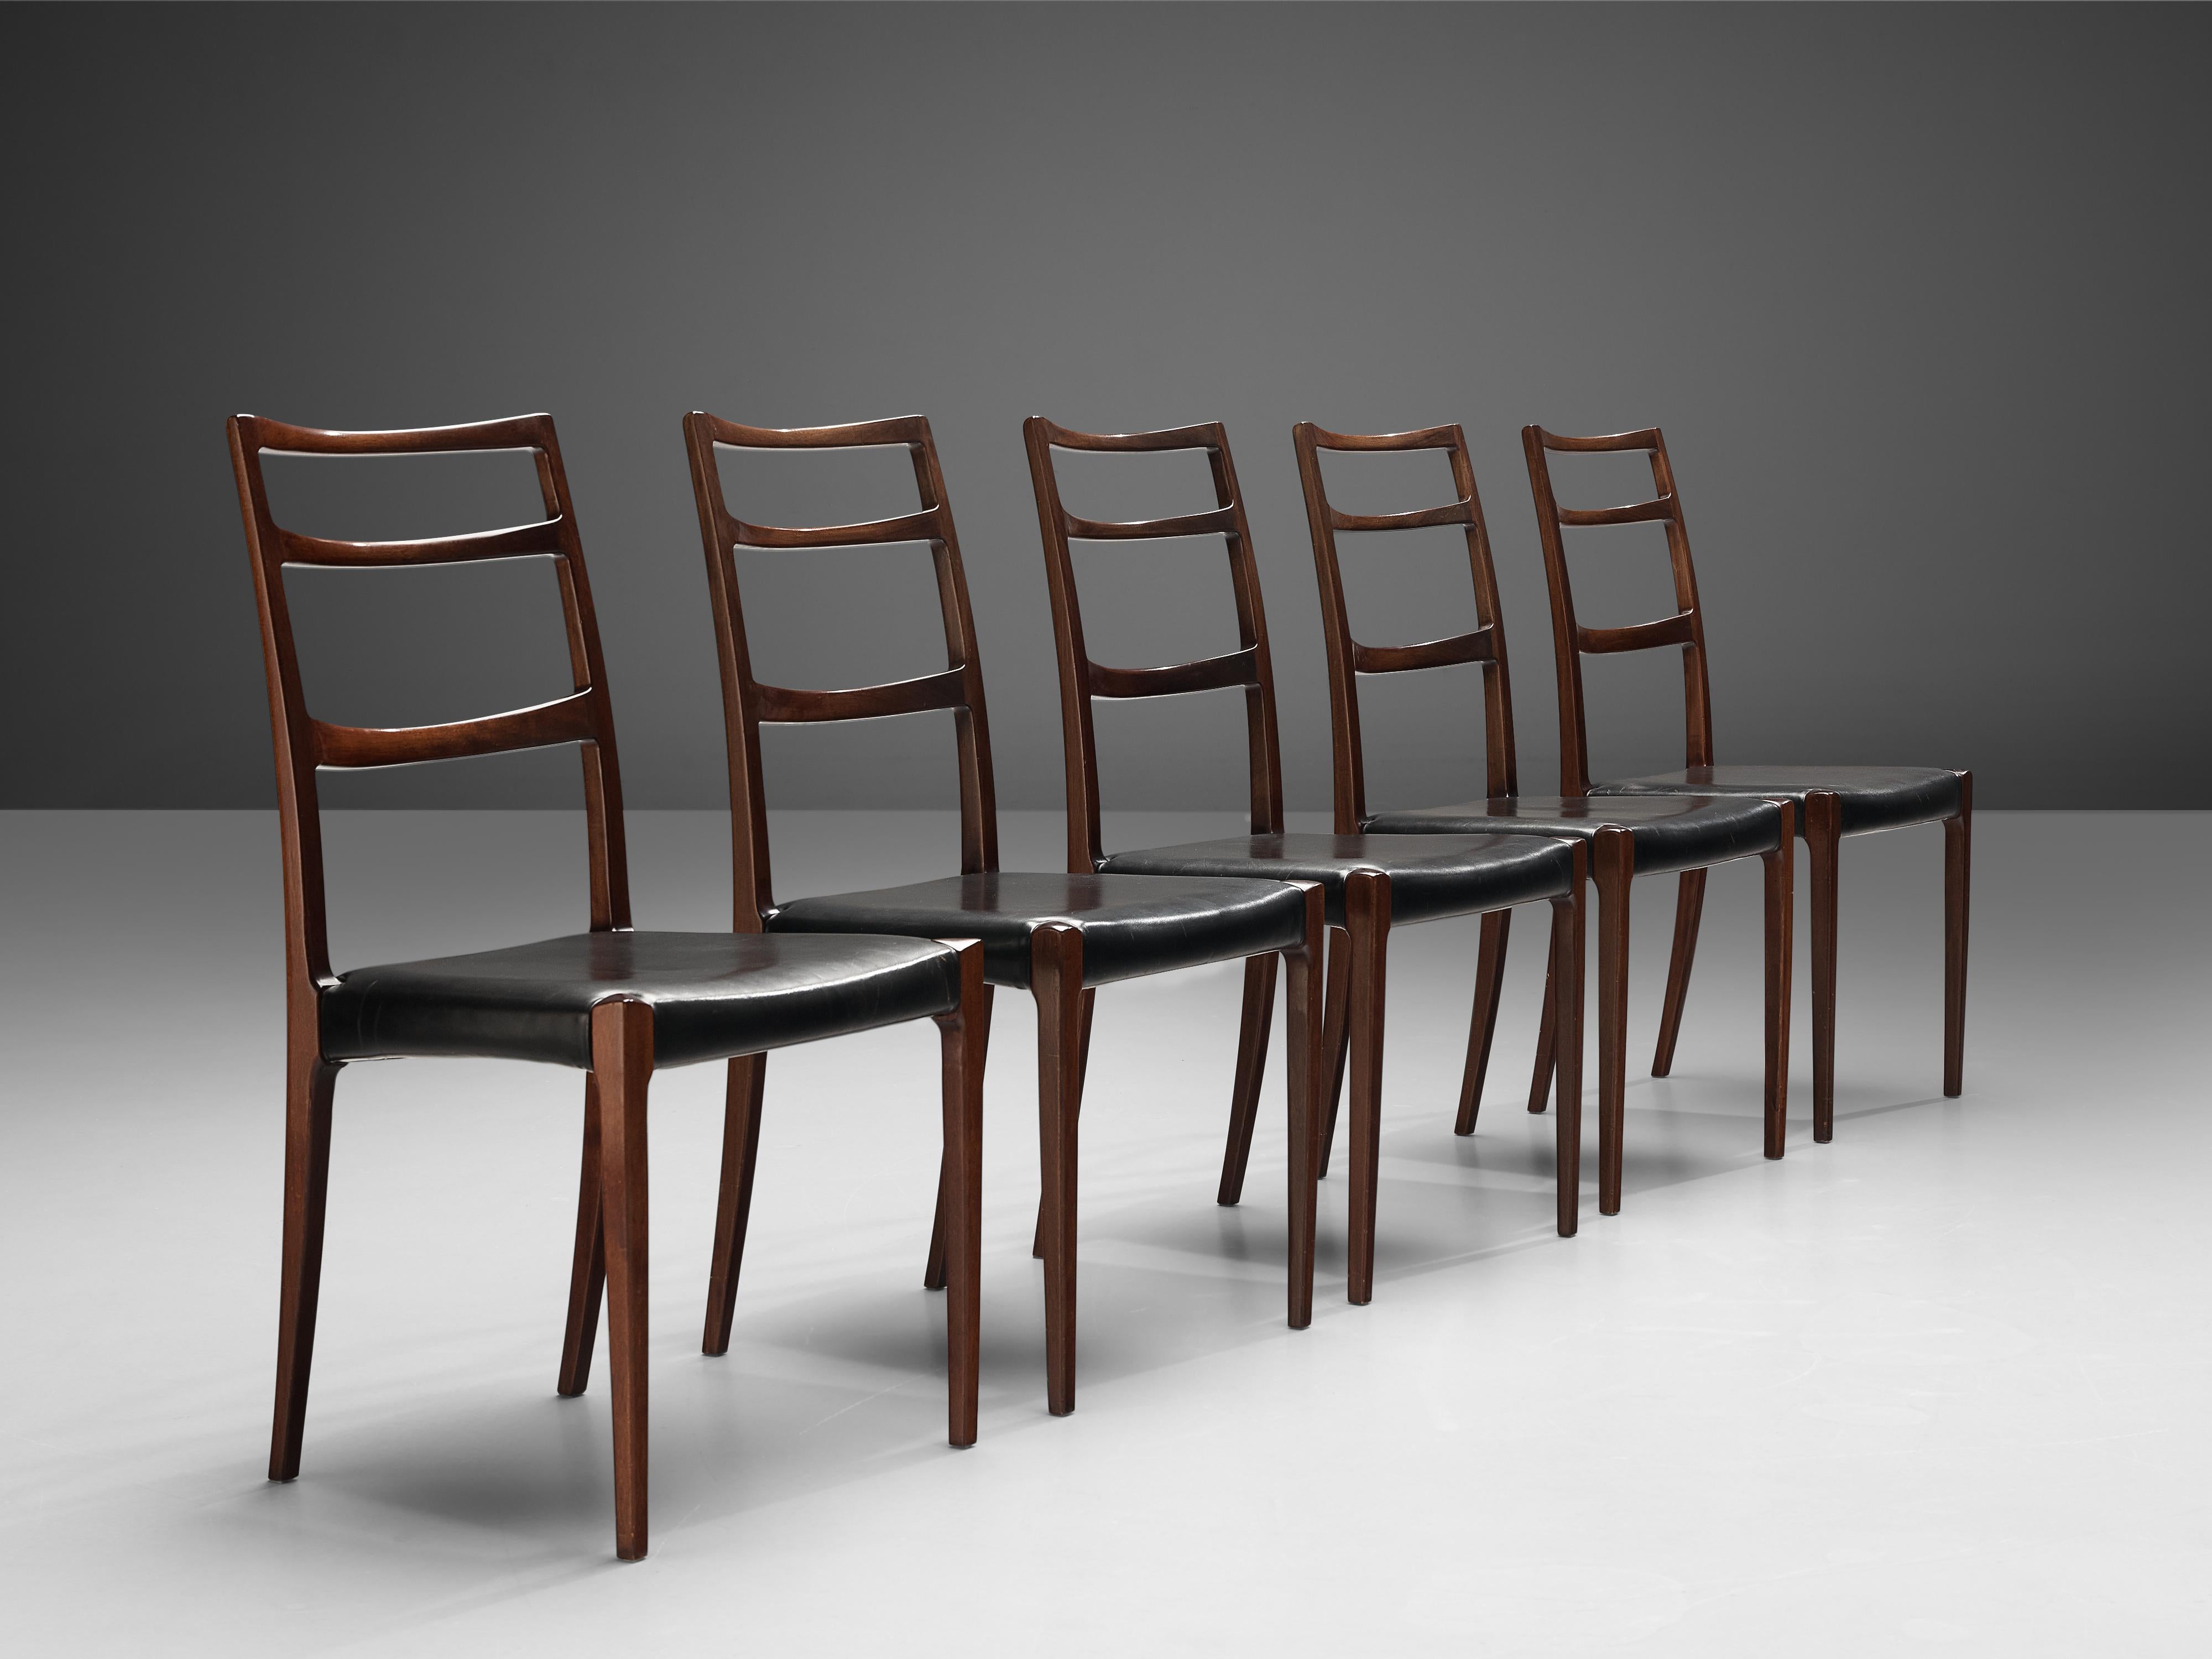 Gunni Omann for Omann Jun, set of five dining chairs, leather, mahogany, Denmark, 1960s-1970s.

This set of five elegant dining chairs features a delicate, well-executed frame. The back is slightly curved and tilted and the open back is supported by